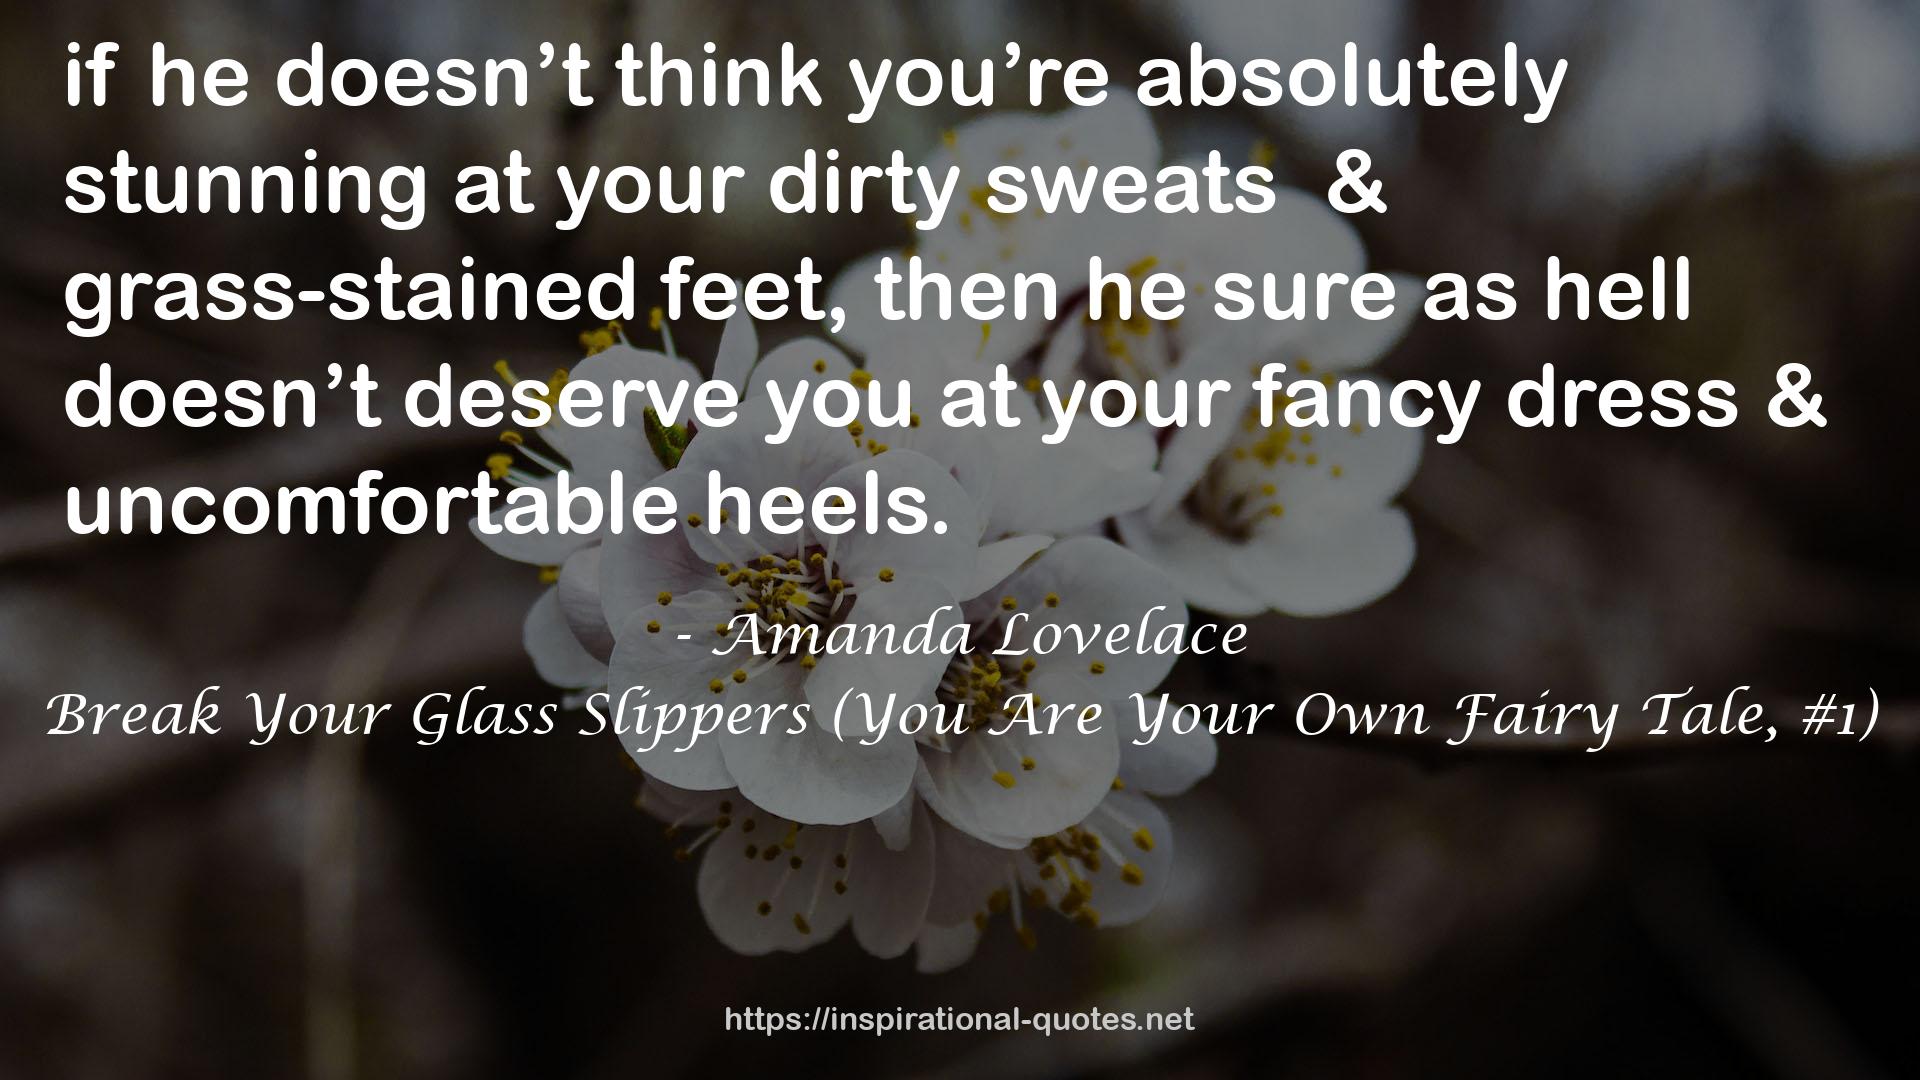 Break Your Glass Slippers (You Are Your Own Fairy Tale, #1) QUOTES